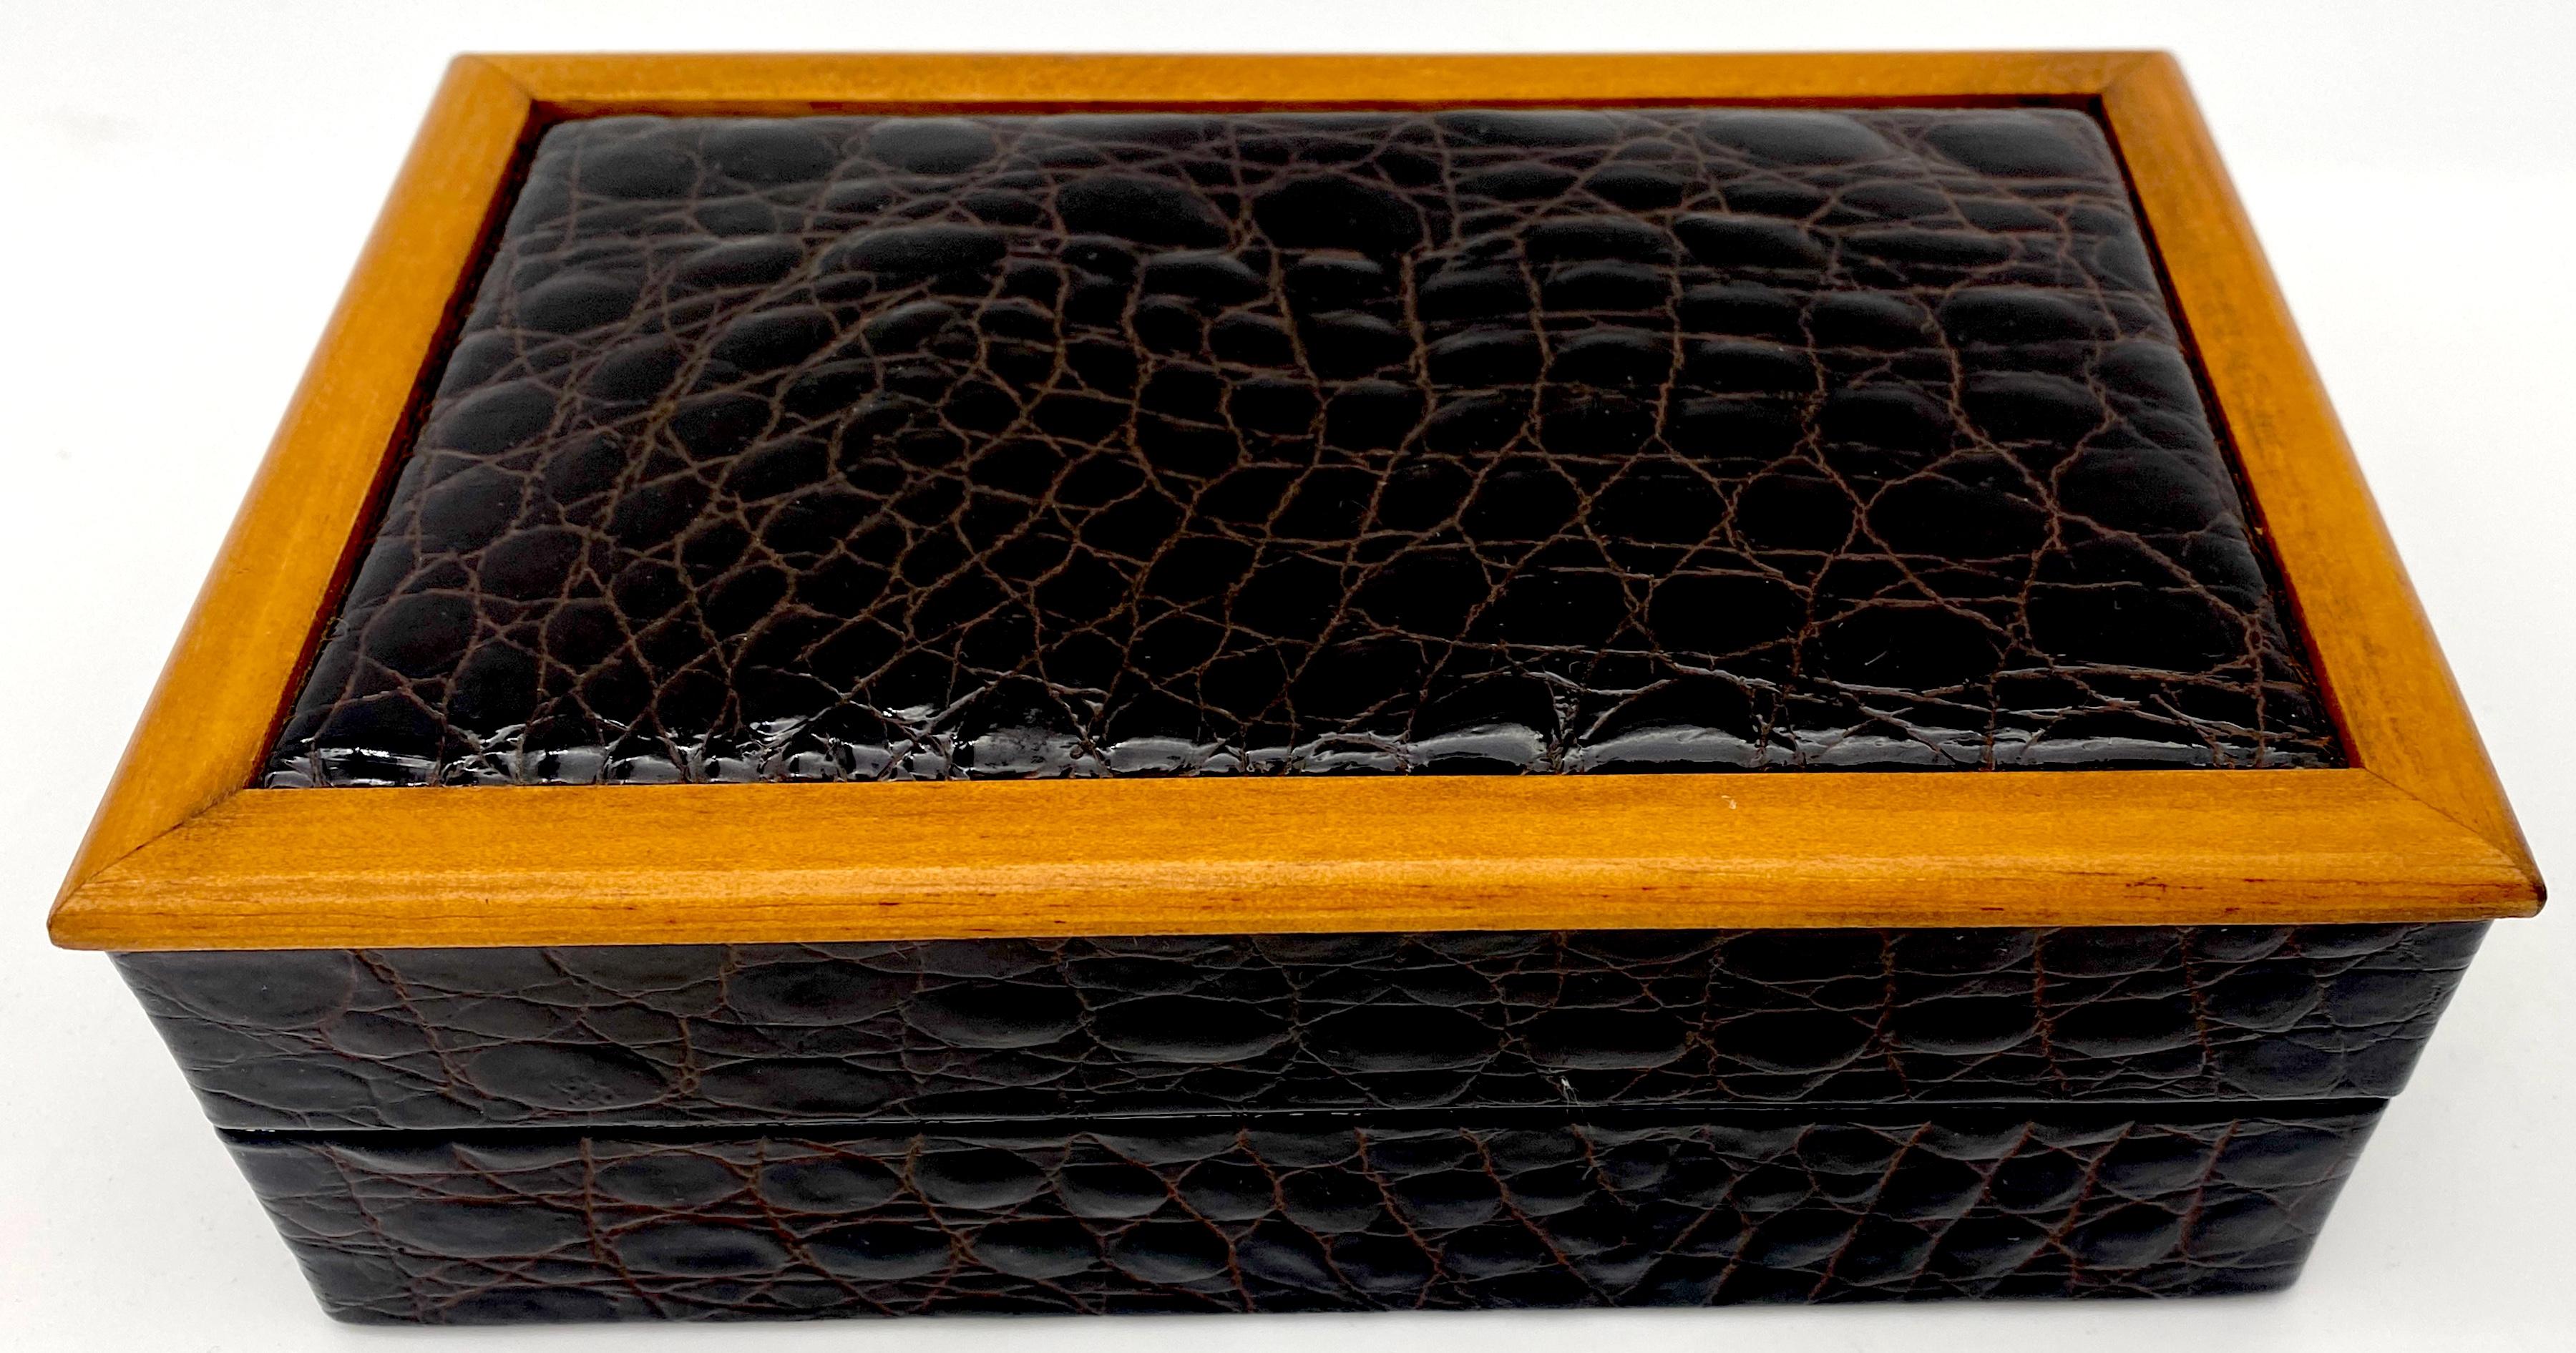 Vintage Italian Embossed  Leather 'Crocodile' Mens Jewelry Box
Stamped in gilt lettering 'Made in Italy'

A vintage Italian Embossed Leather 'Crocodile' Men's Jewelry Box, a rare gem from the 1950s, quietly exuding glamour. Stamped in gilt lettering